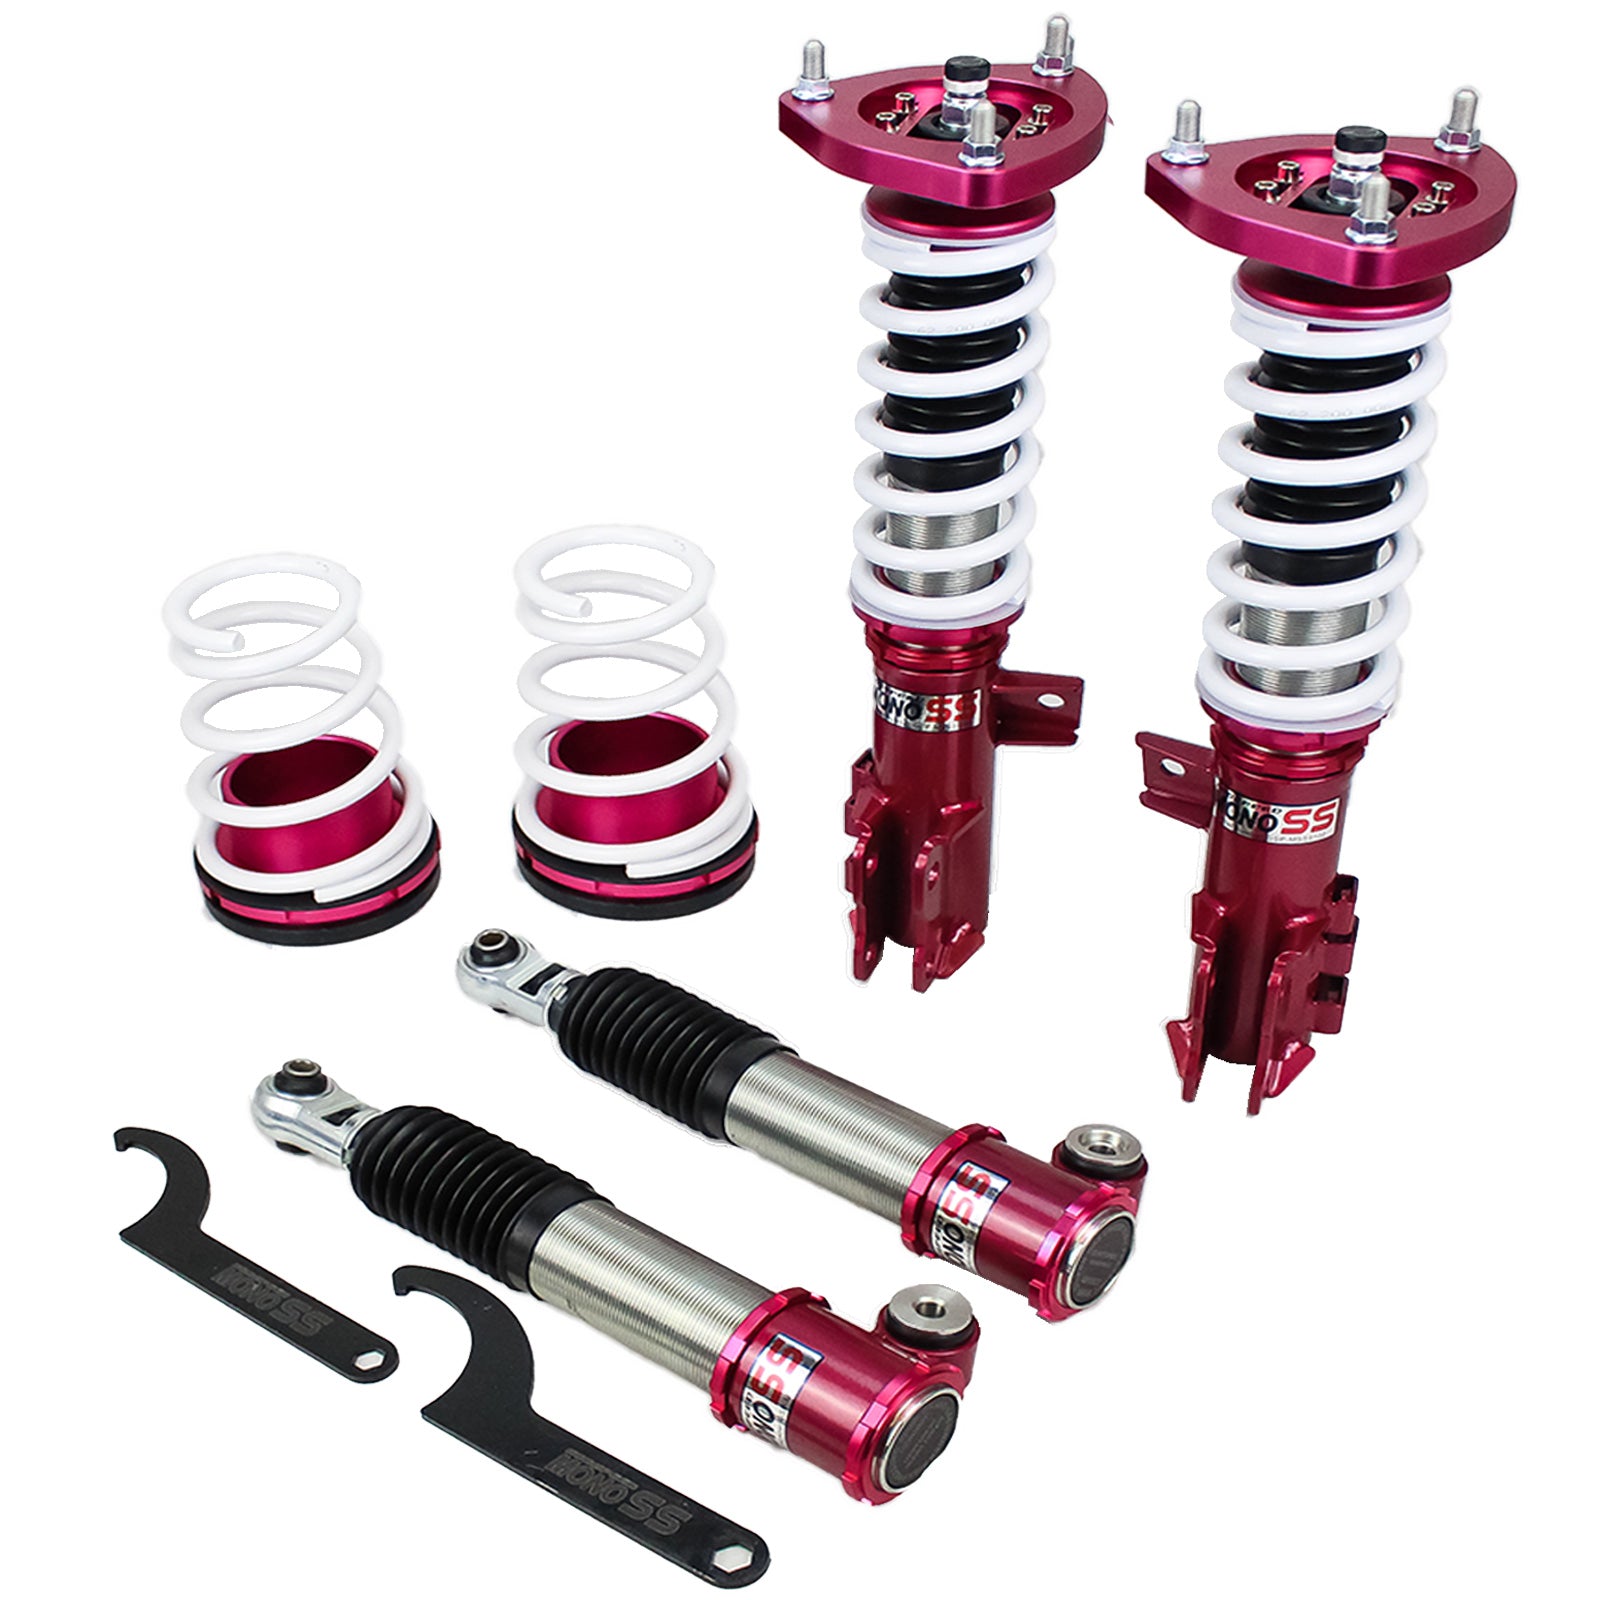 Godspeed MSS0102-B MonoSS Coilover Lowering Kit, Fully Adjustable, Ride Height, Spring Tension And 16 Click Damping, Kia Forte(TD) 2010-13